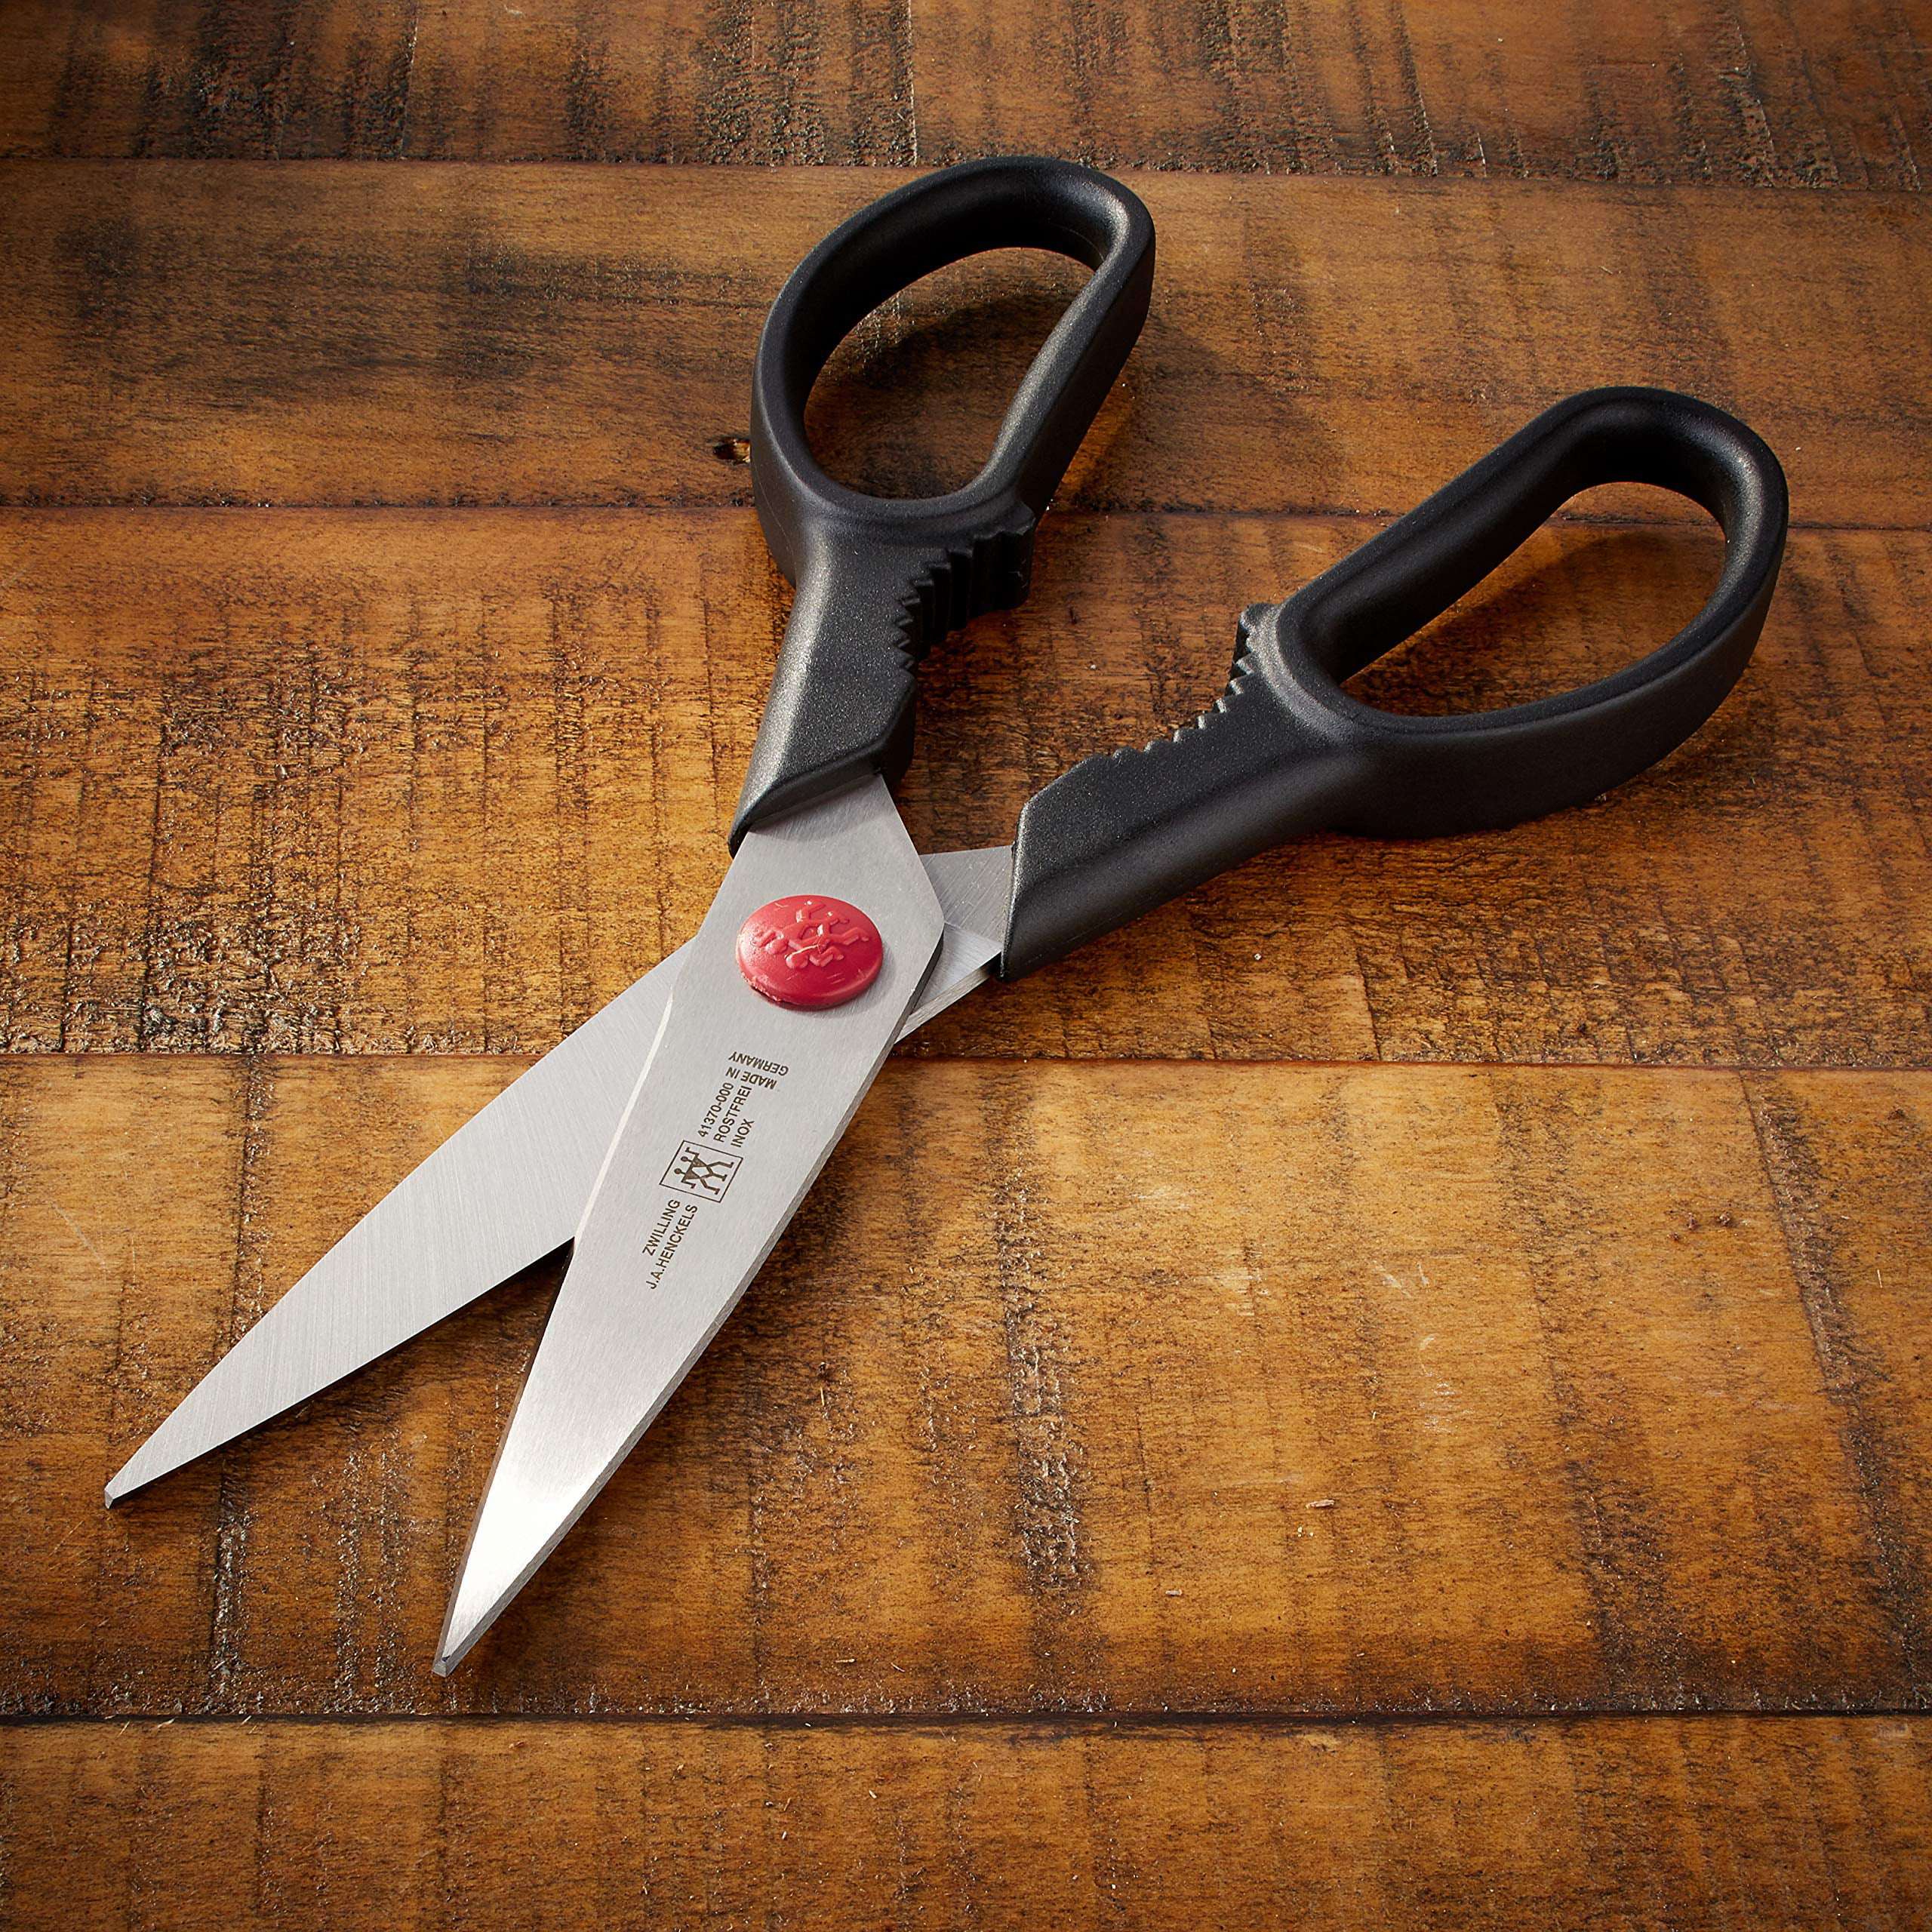 L 7.5" Cloth Shears 41300-191 Details about   ZWILLING J A Henckels TWIN 